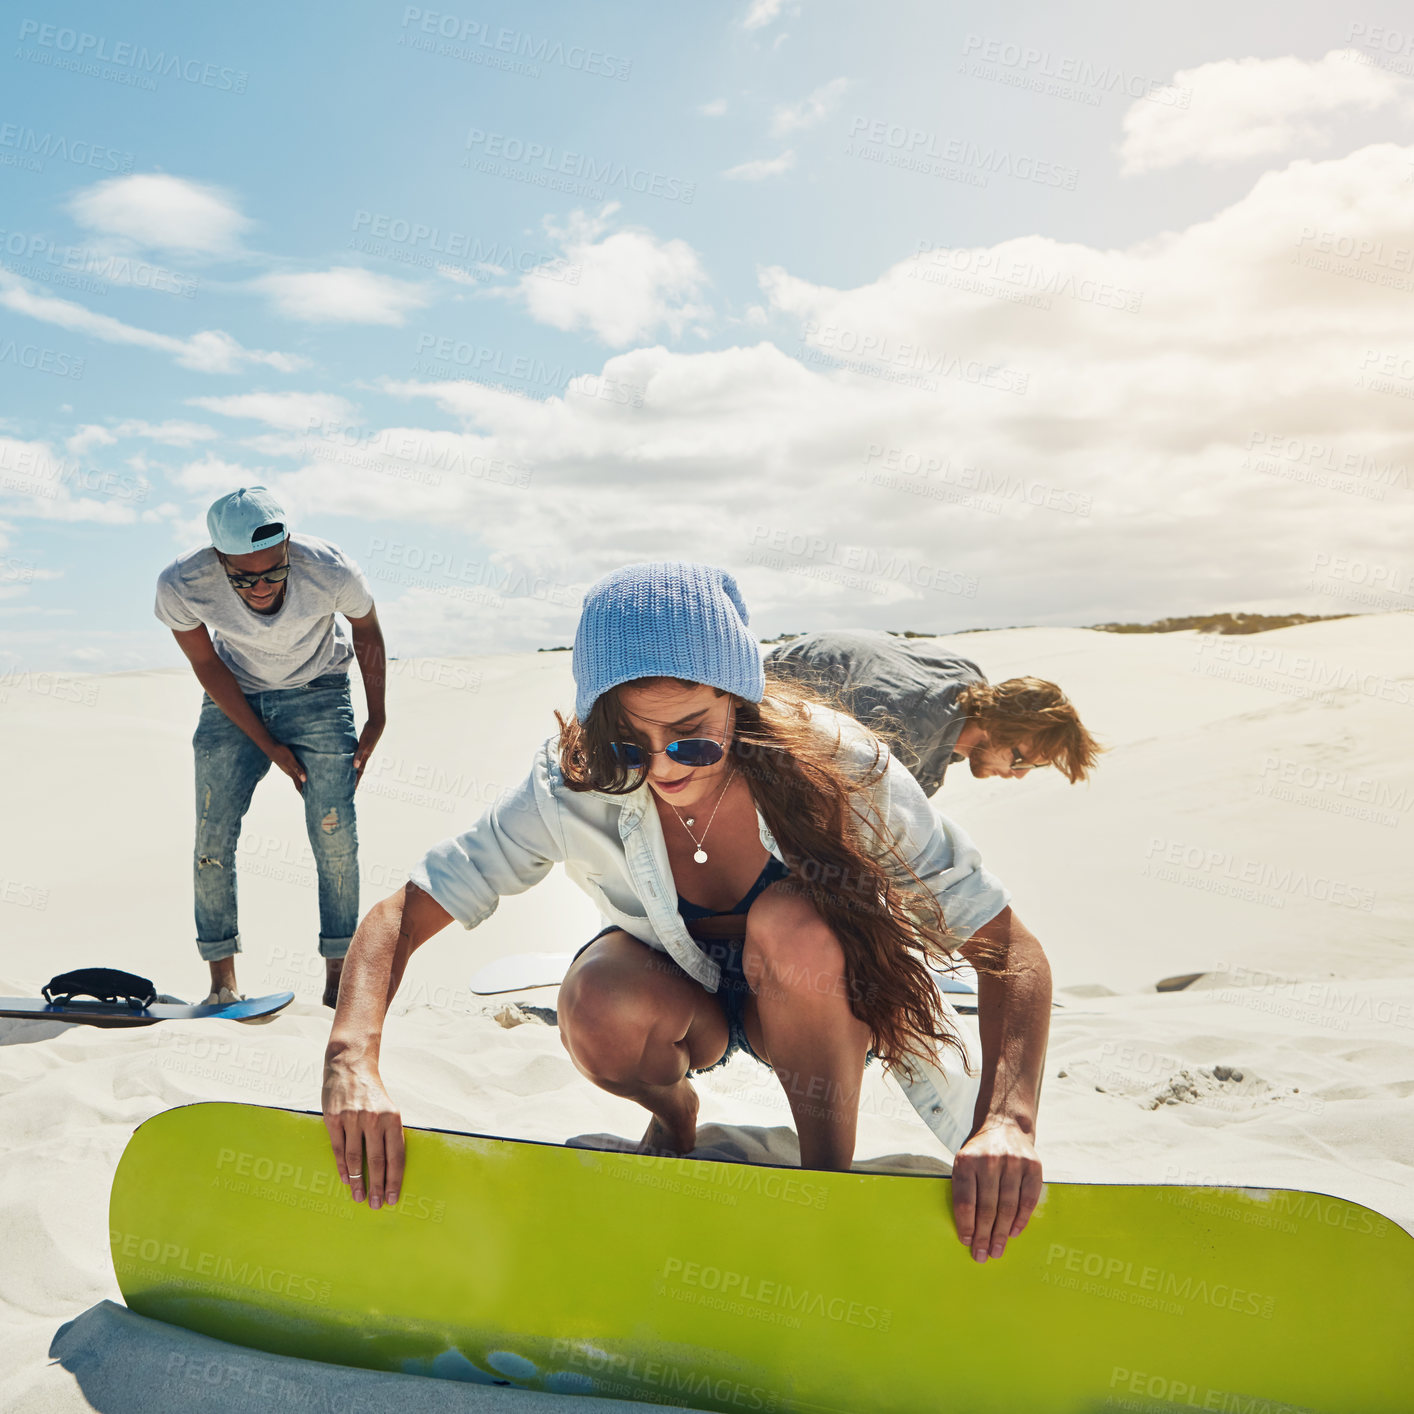 Buy stock photo Shot of young people sandboarding in the desert